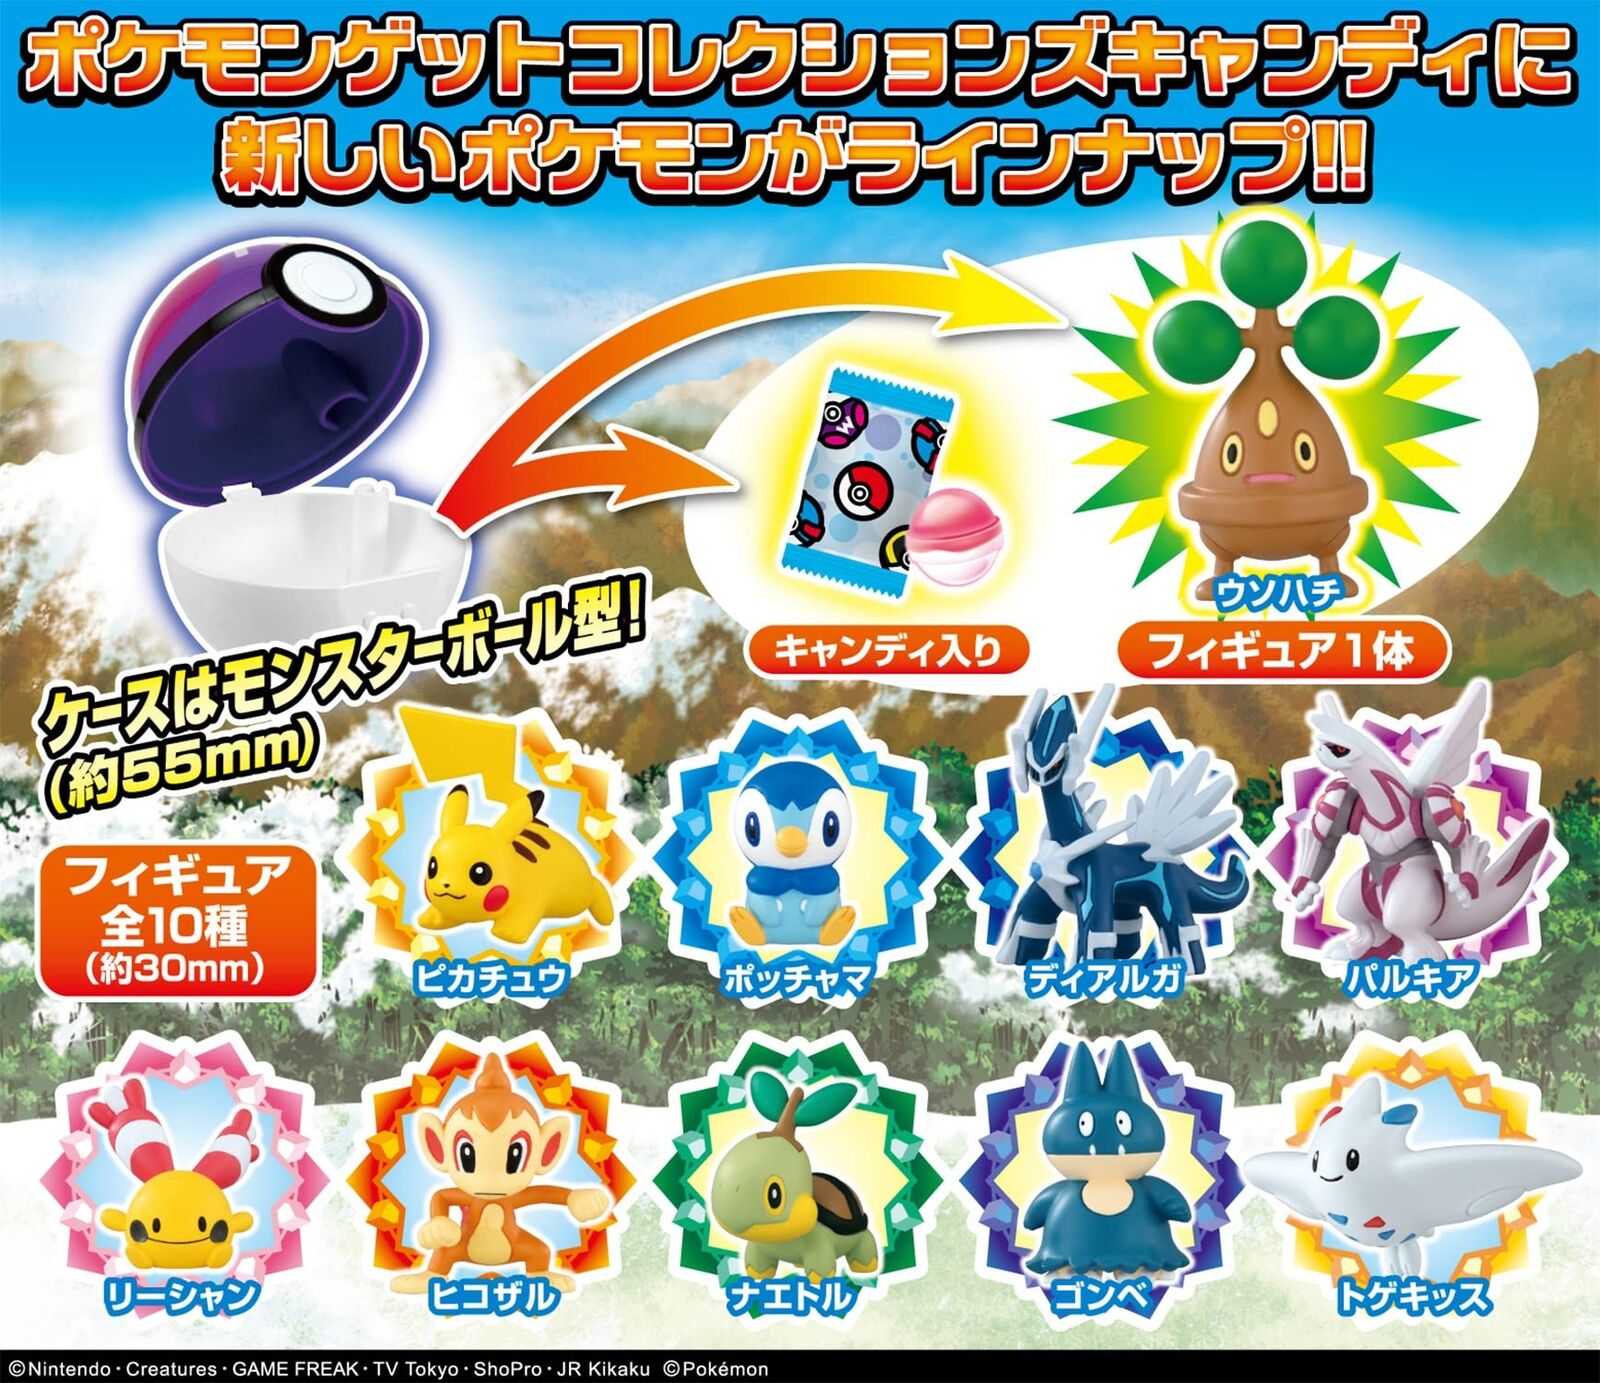 Pokemon Get Candy Adventure with Pokemon from the Sinnoh region 10 pieces candy